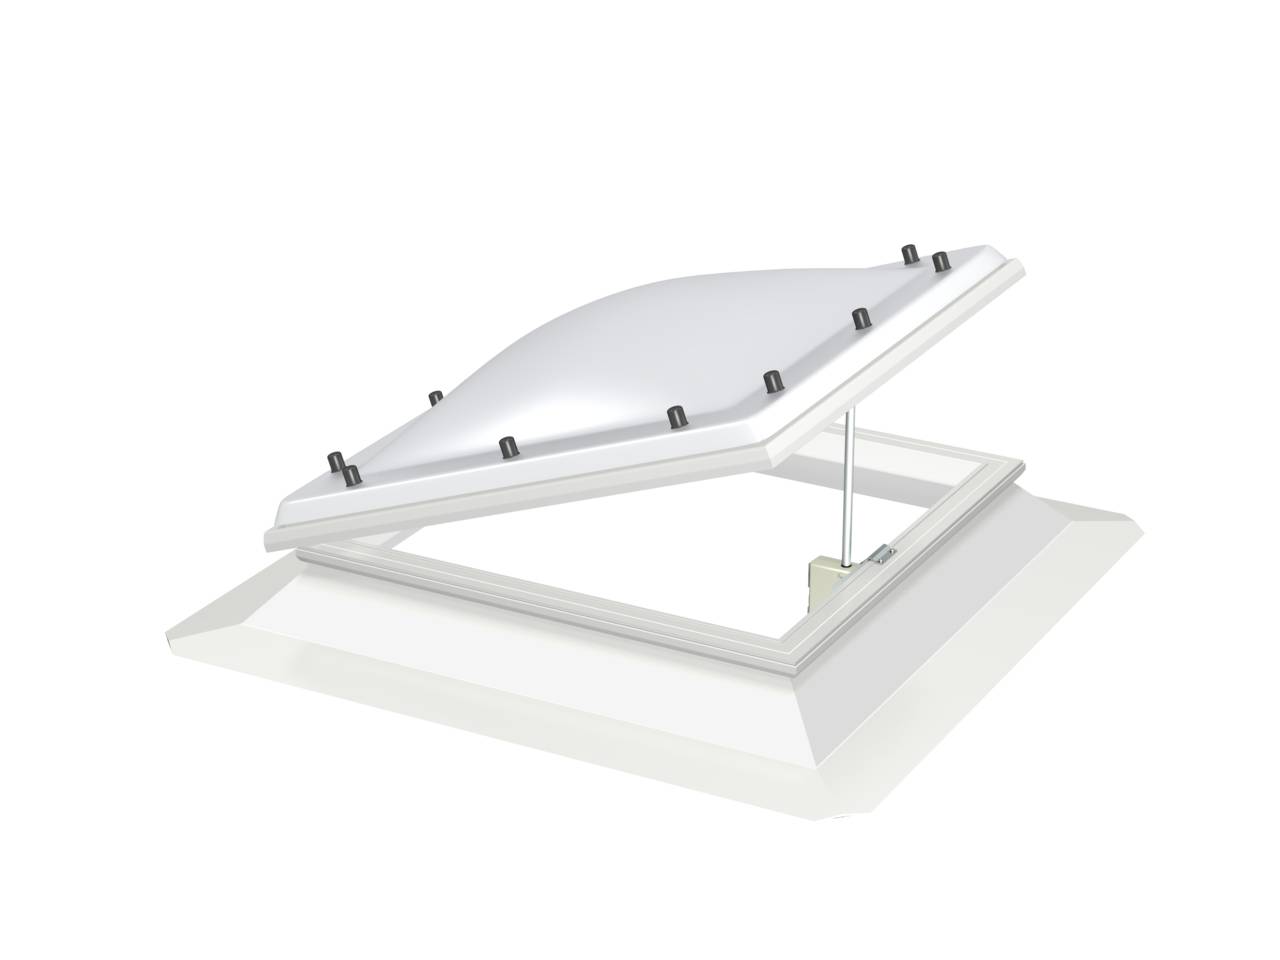 CVJ Vented, Flat Roof Base Unit with Polycarbonate Dome Cover